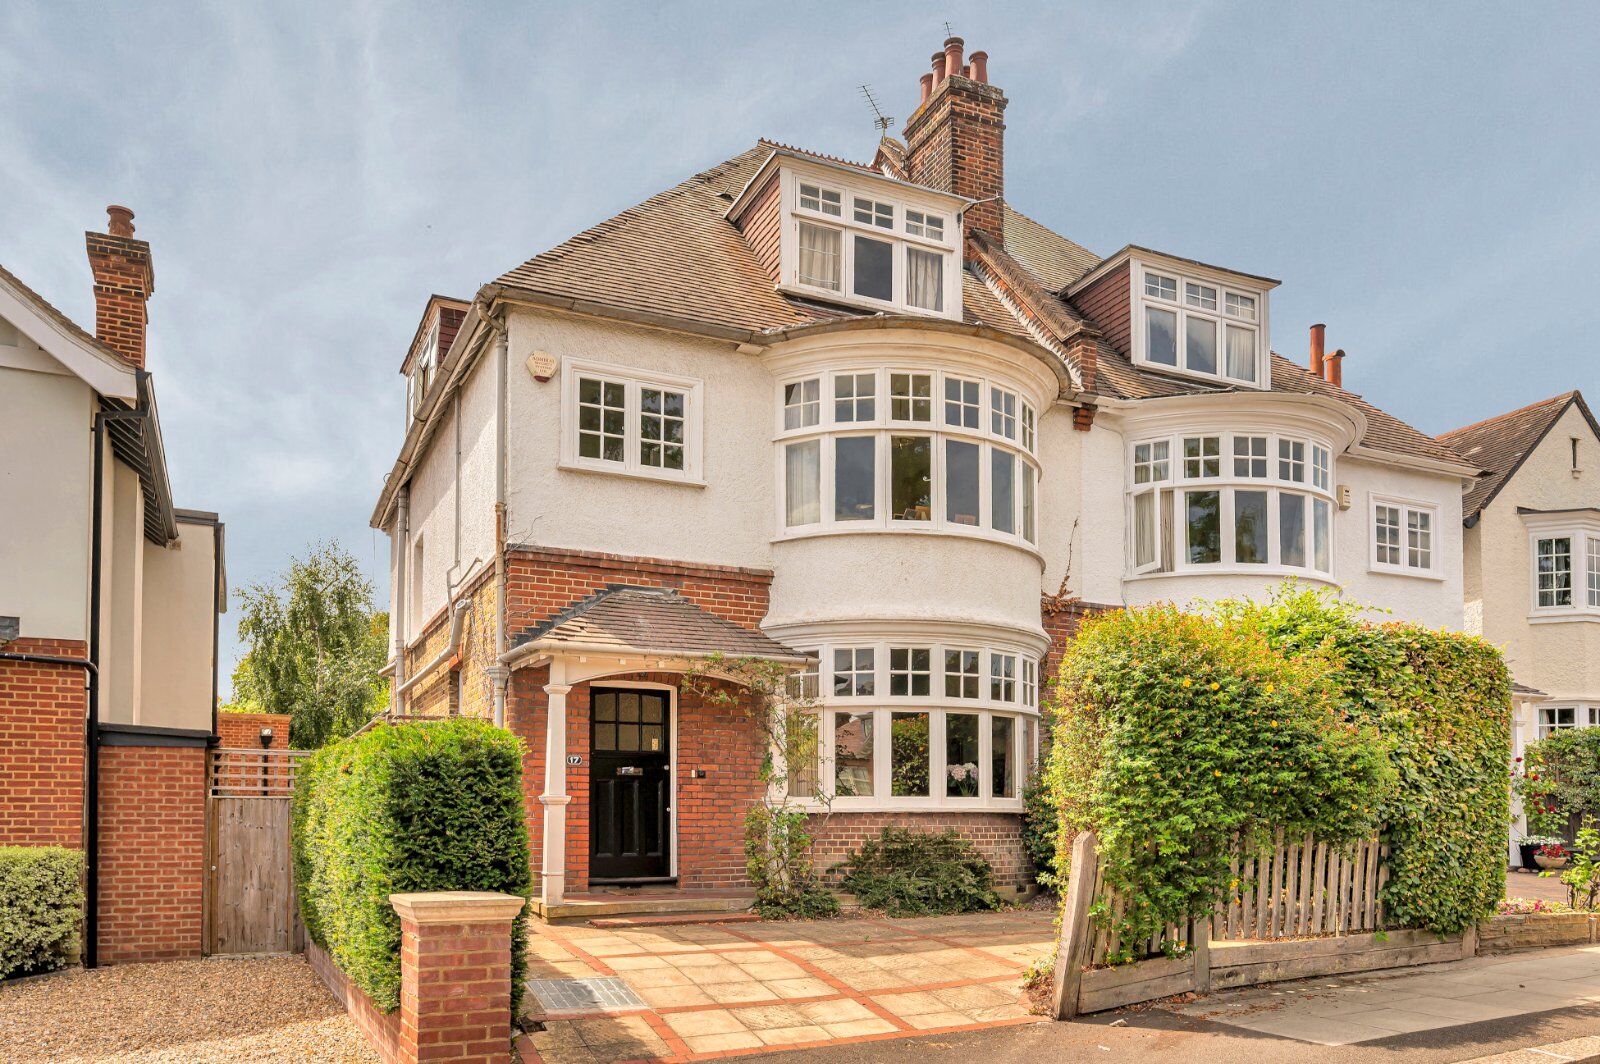 5 bedroom semi detached house for sale Murray Road, Wimbledon, SW19, main image